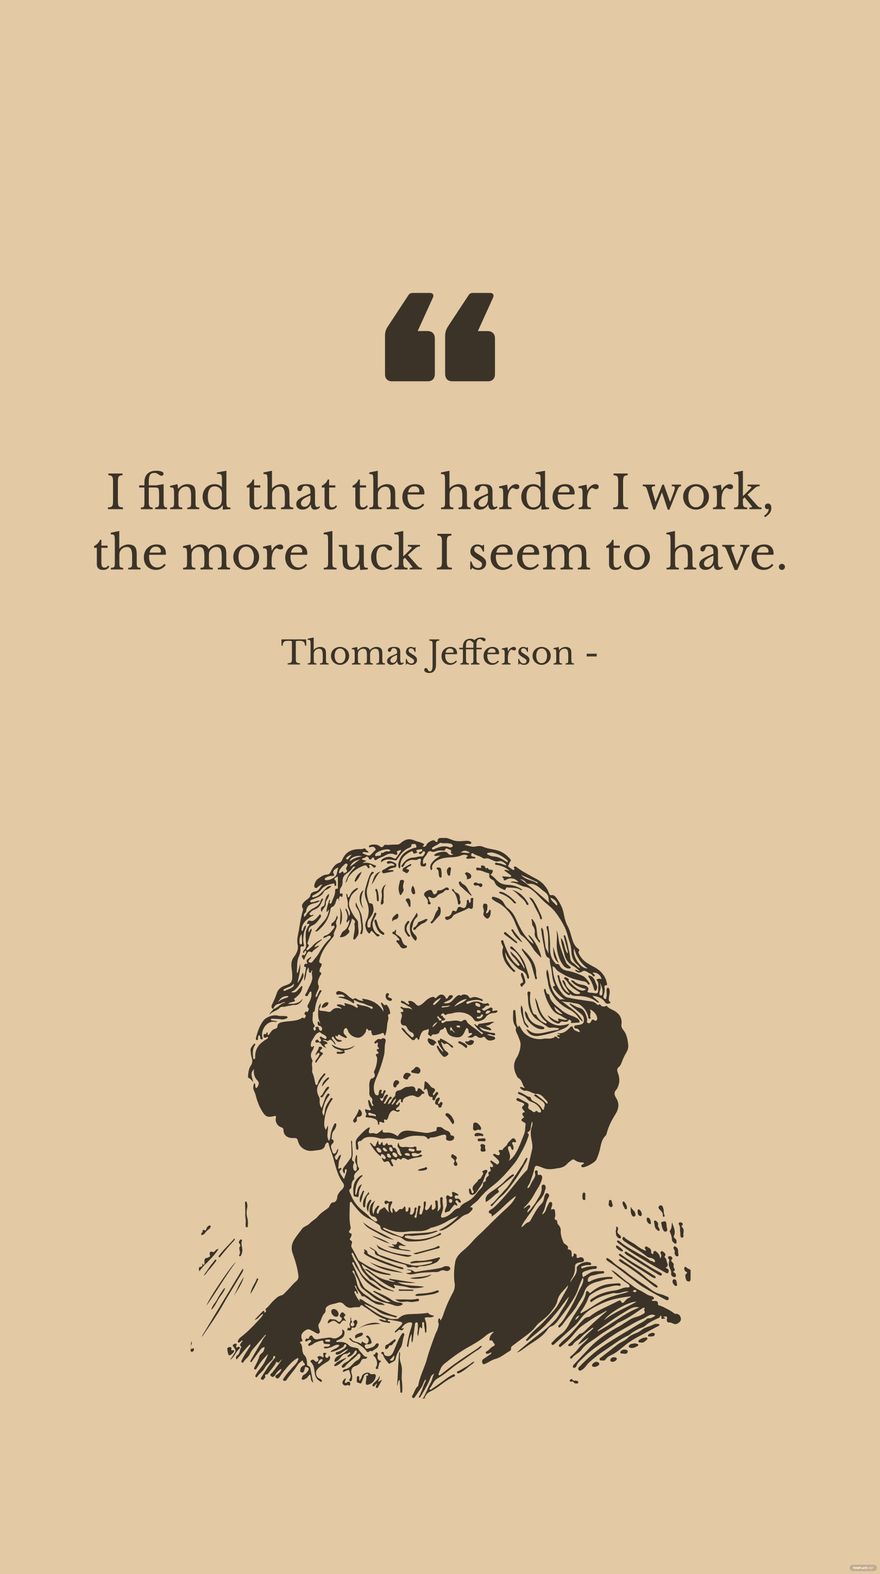 Thomas Jefferson - I find that the harder I work, the more luck I seem to have. in JPG